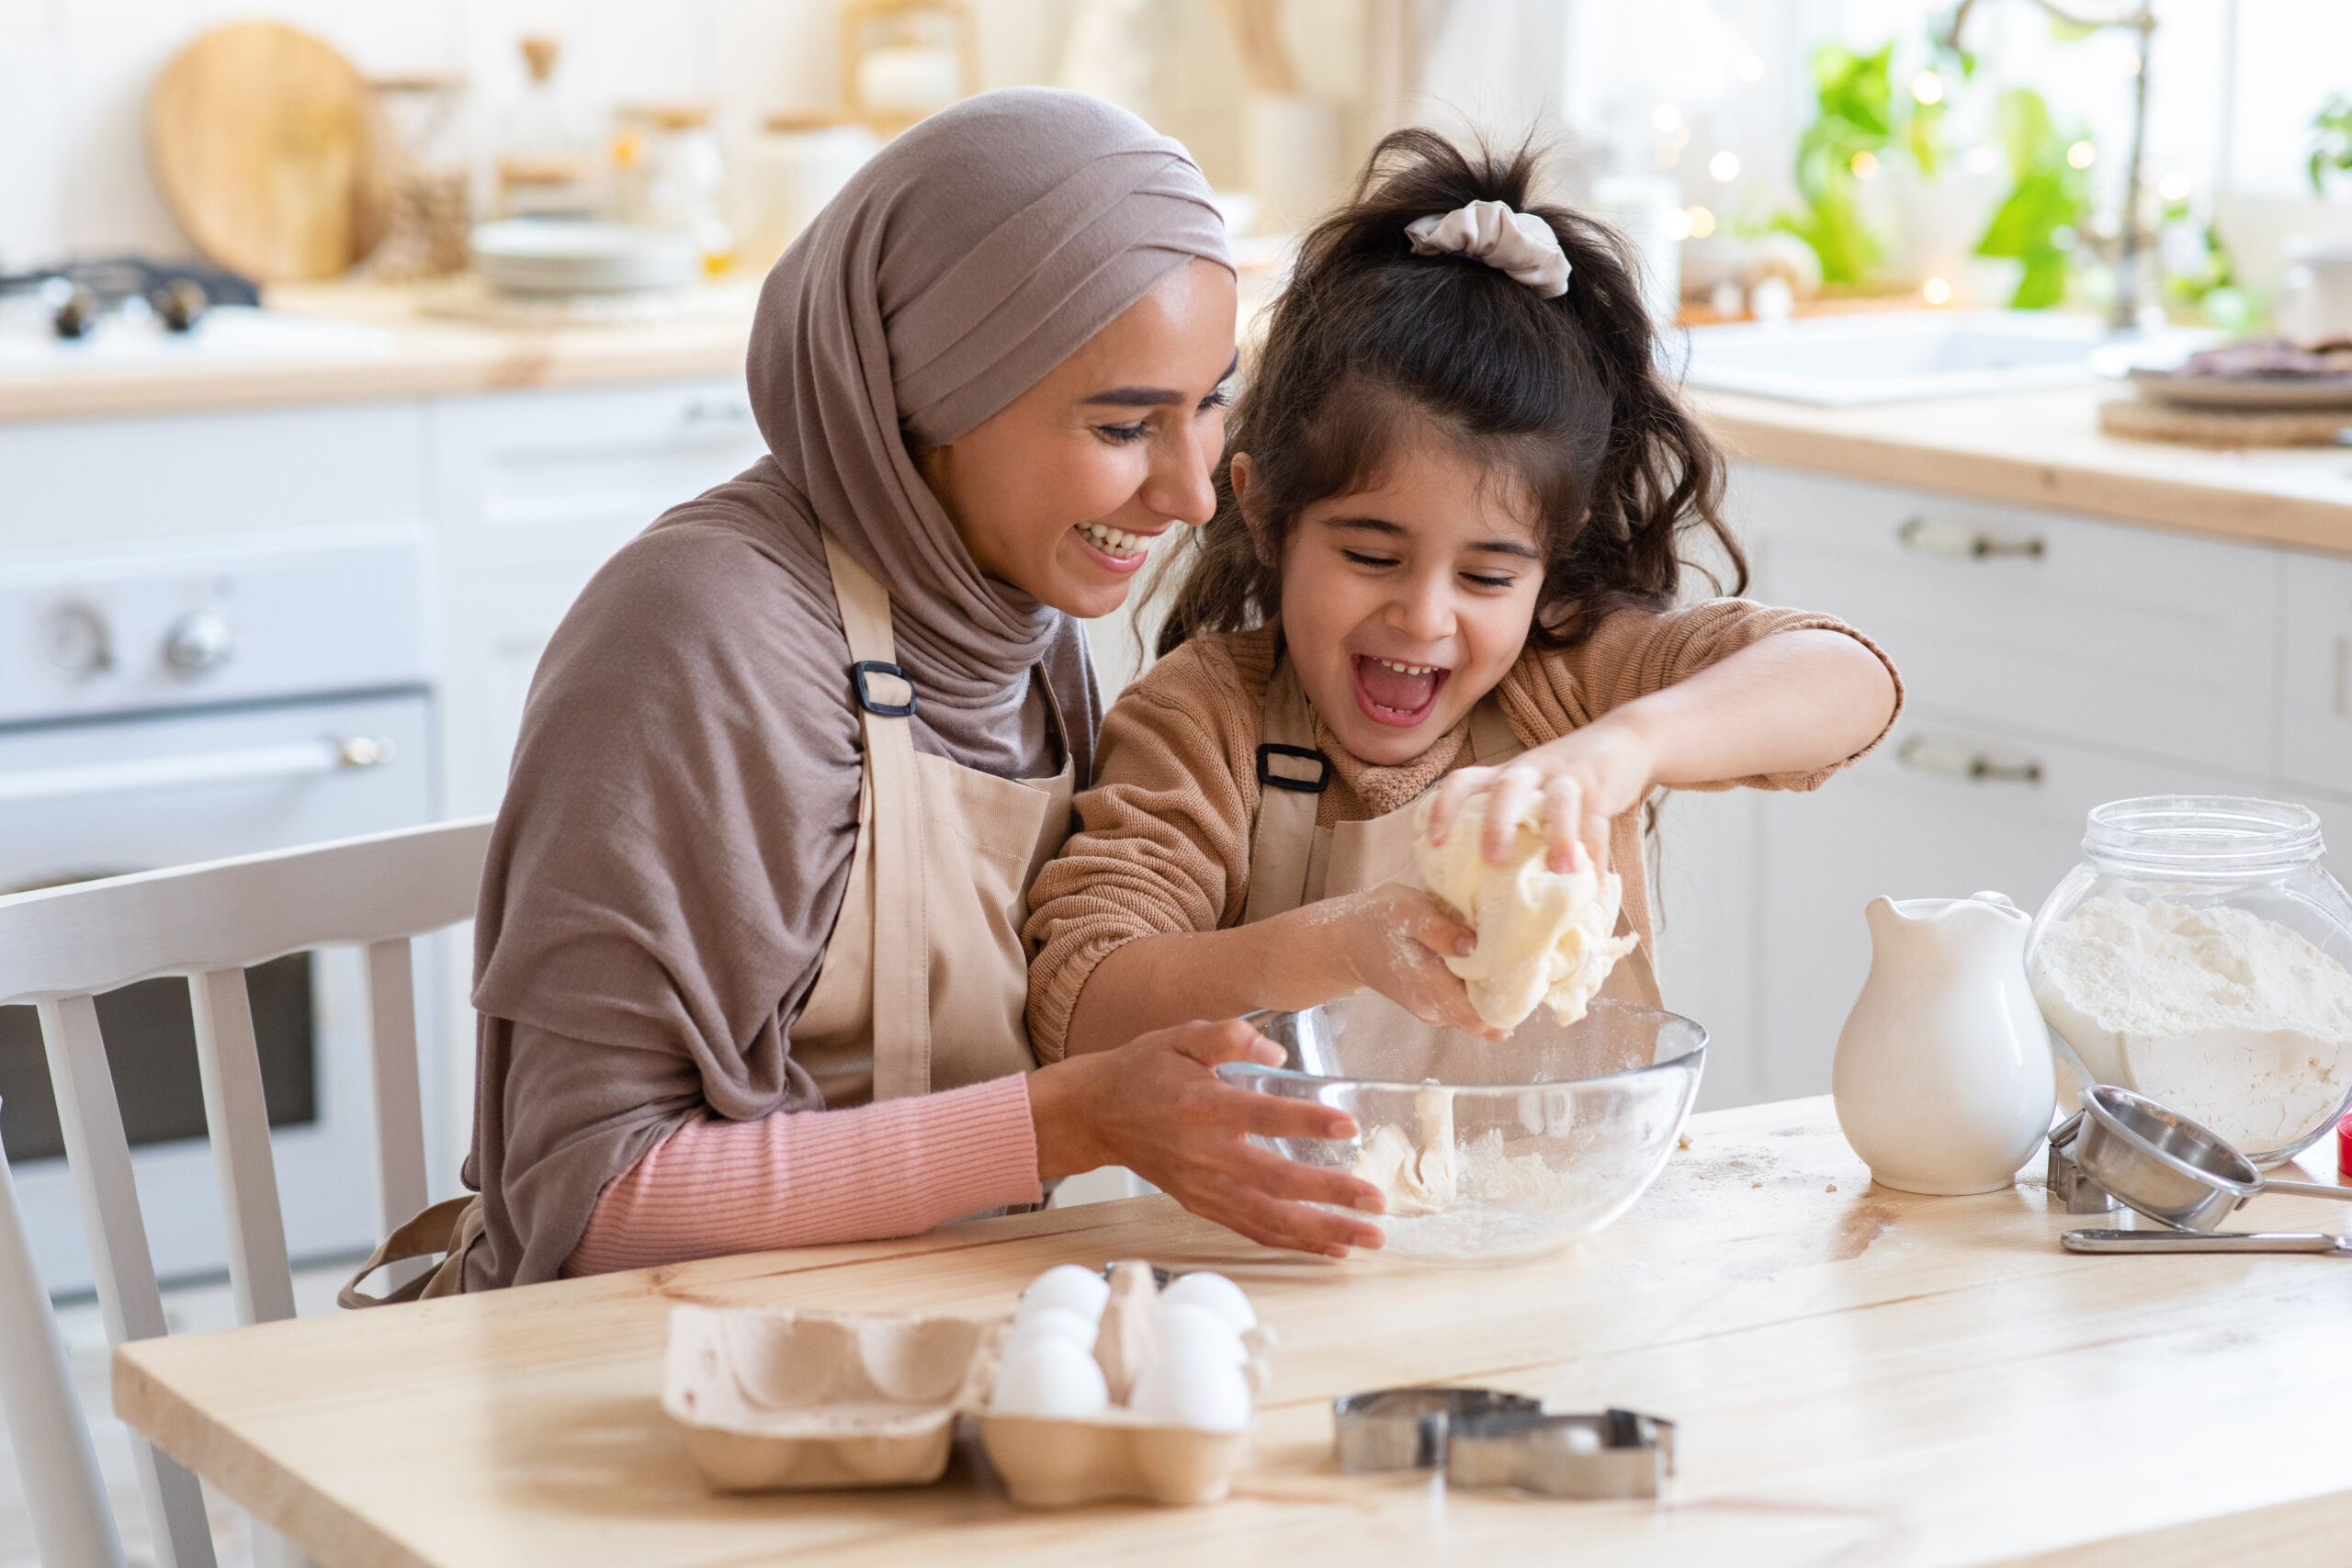 Muslim Mom And Daughter Having Fun At Home, Baking In Kitchen Together